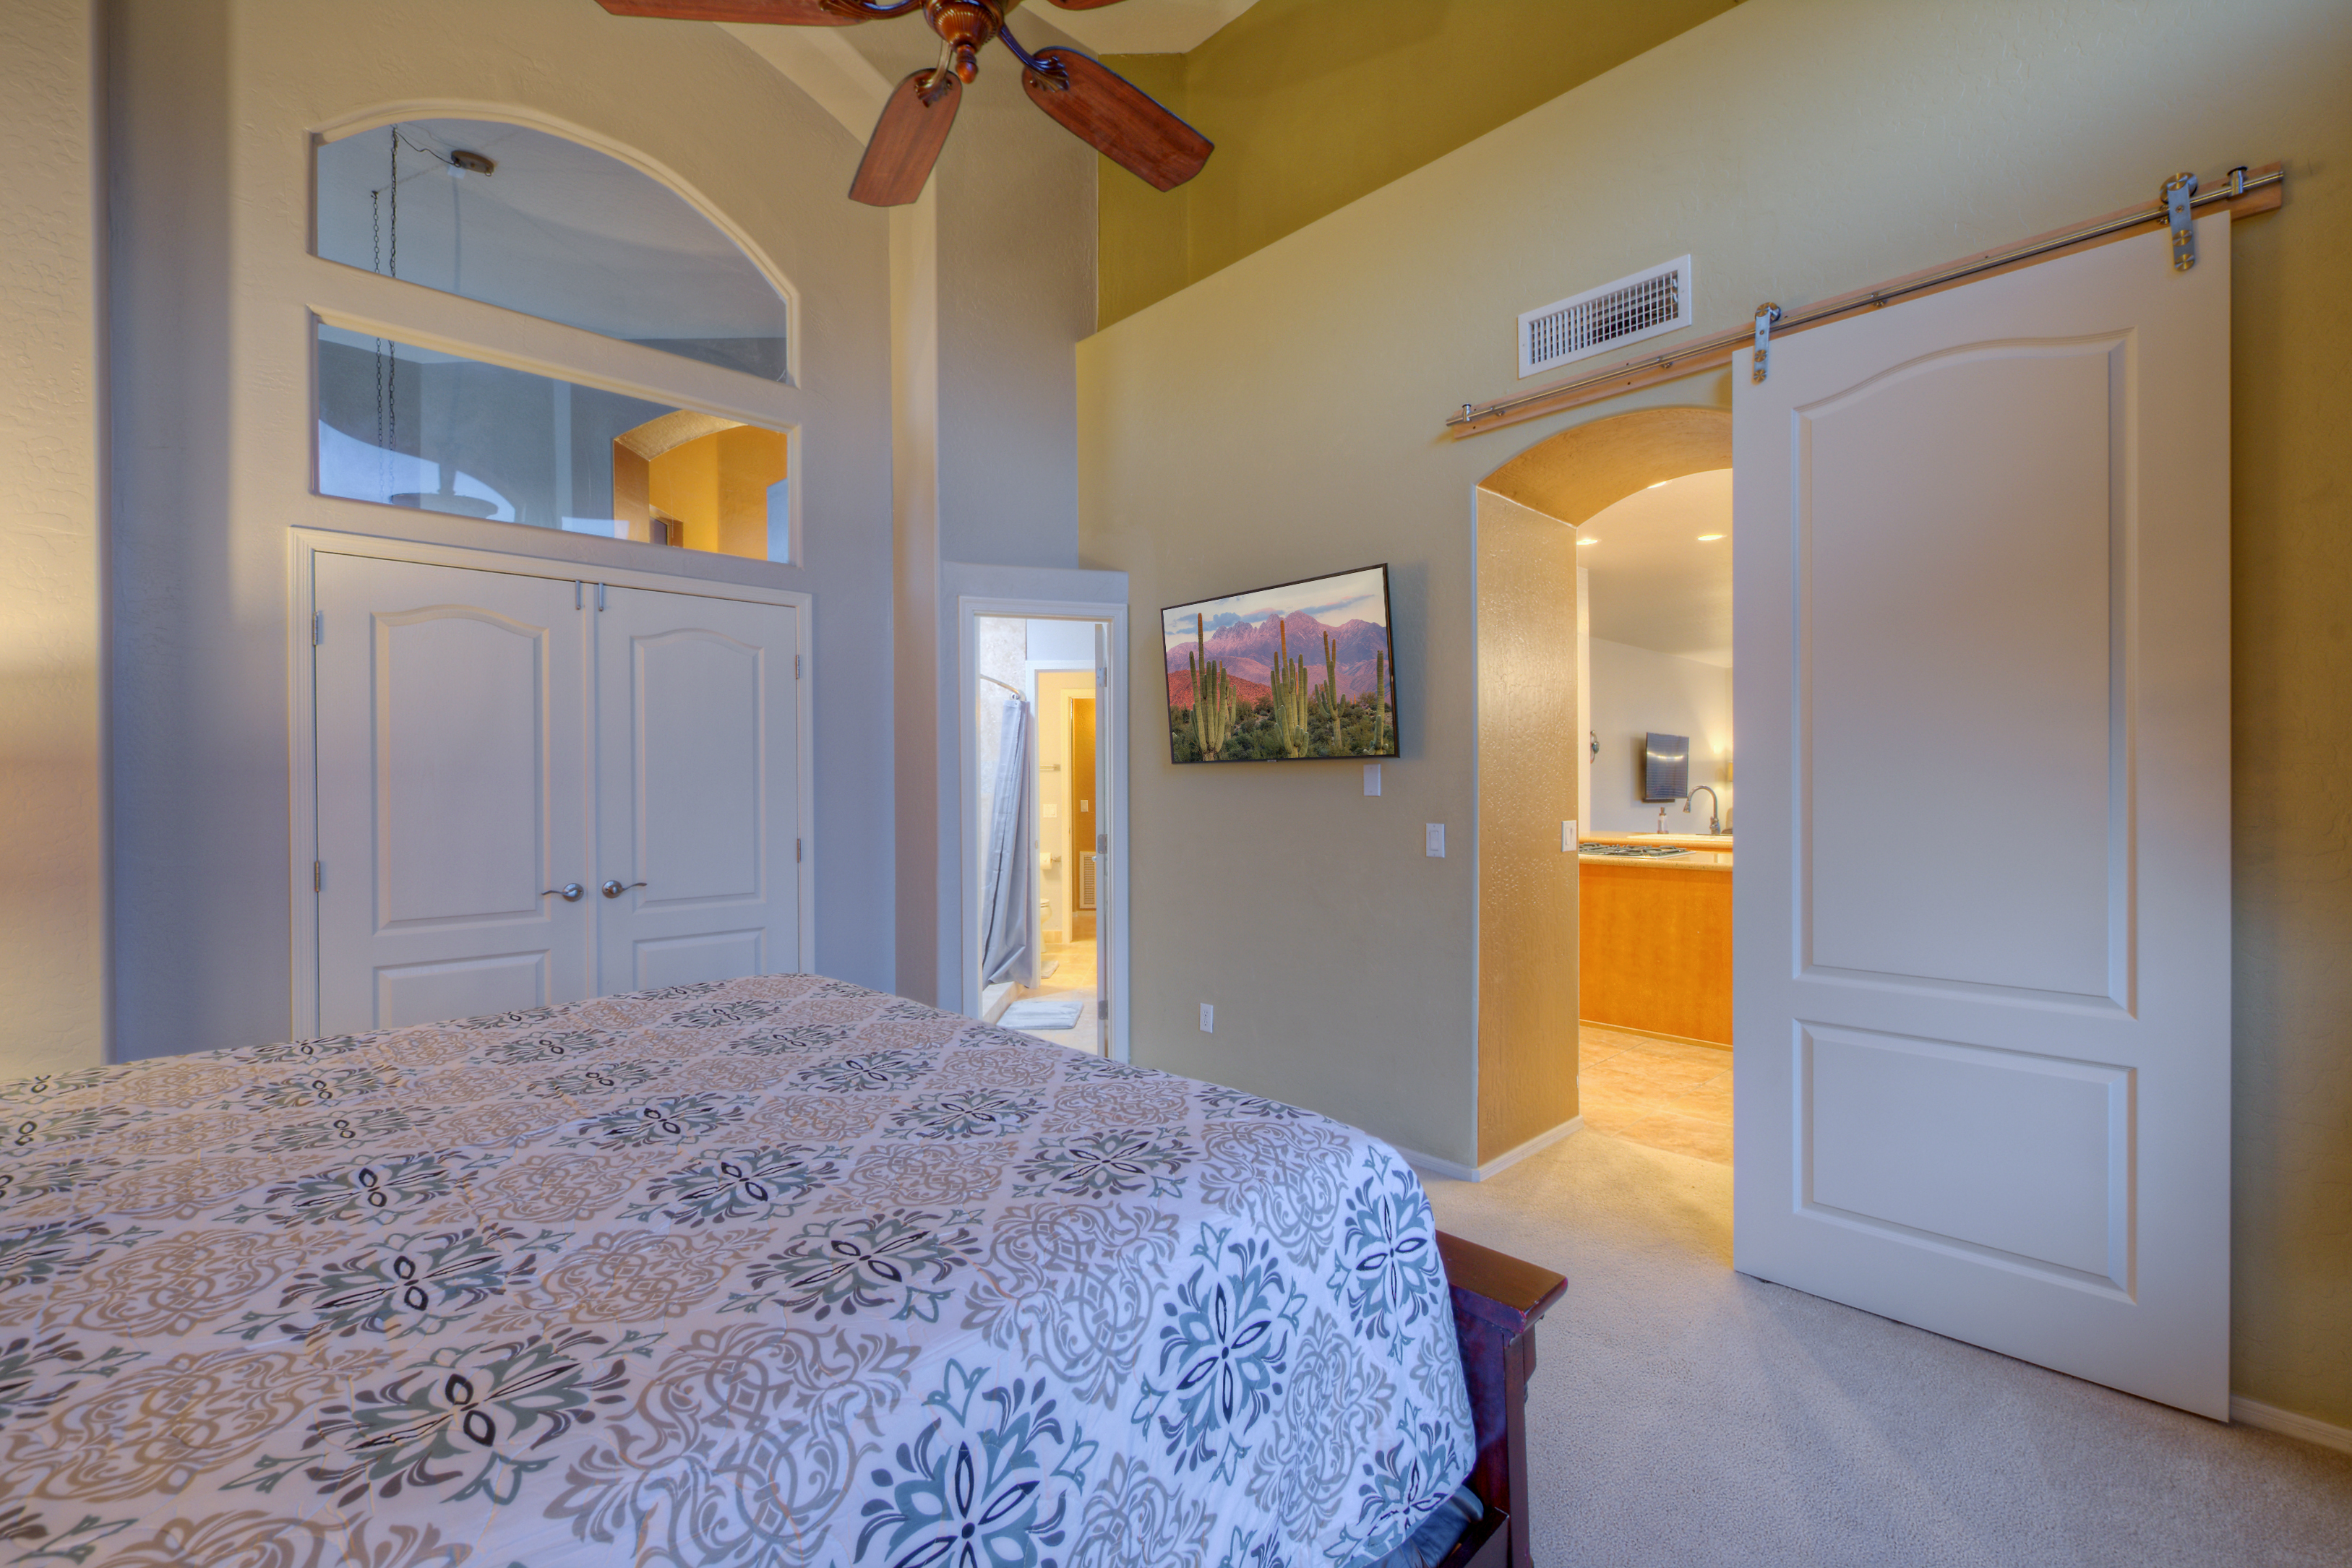 Exquisite 7th bedroom with king bed and TV is adjacent to the kitchen.